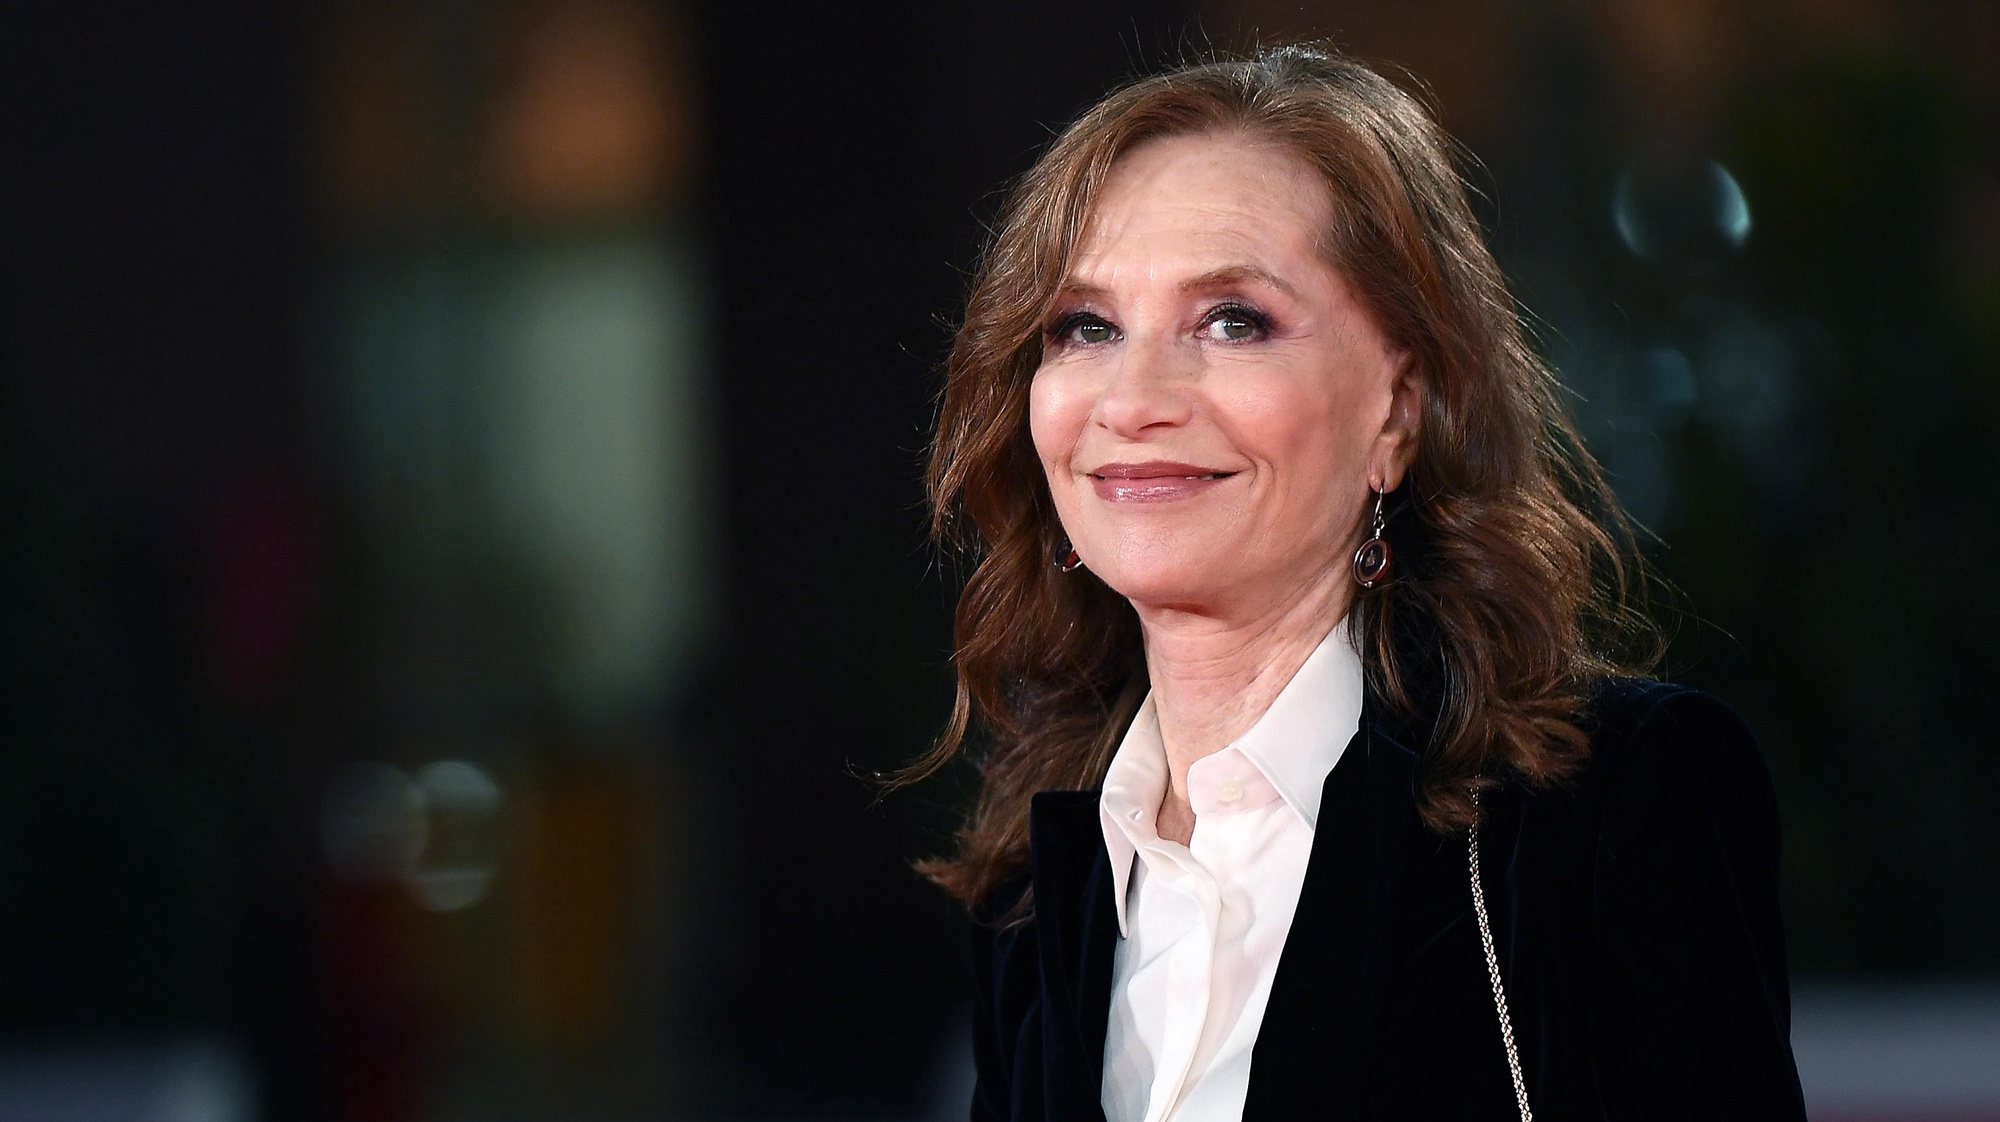 epa08757874 French actress Isabelle Huppert arrives for the screening of &#039;Le Discours&#039; (The Speech) at the 15th annual Rome International Film Festival, in Rome, Italy, 19 October 2020. The film festival runs from 15 to 25 October.  EPA/ETTORE FERRARI